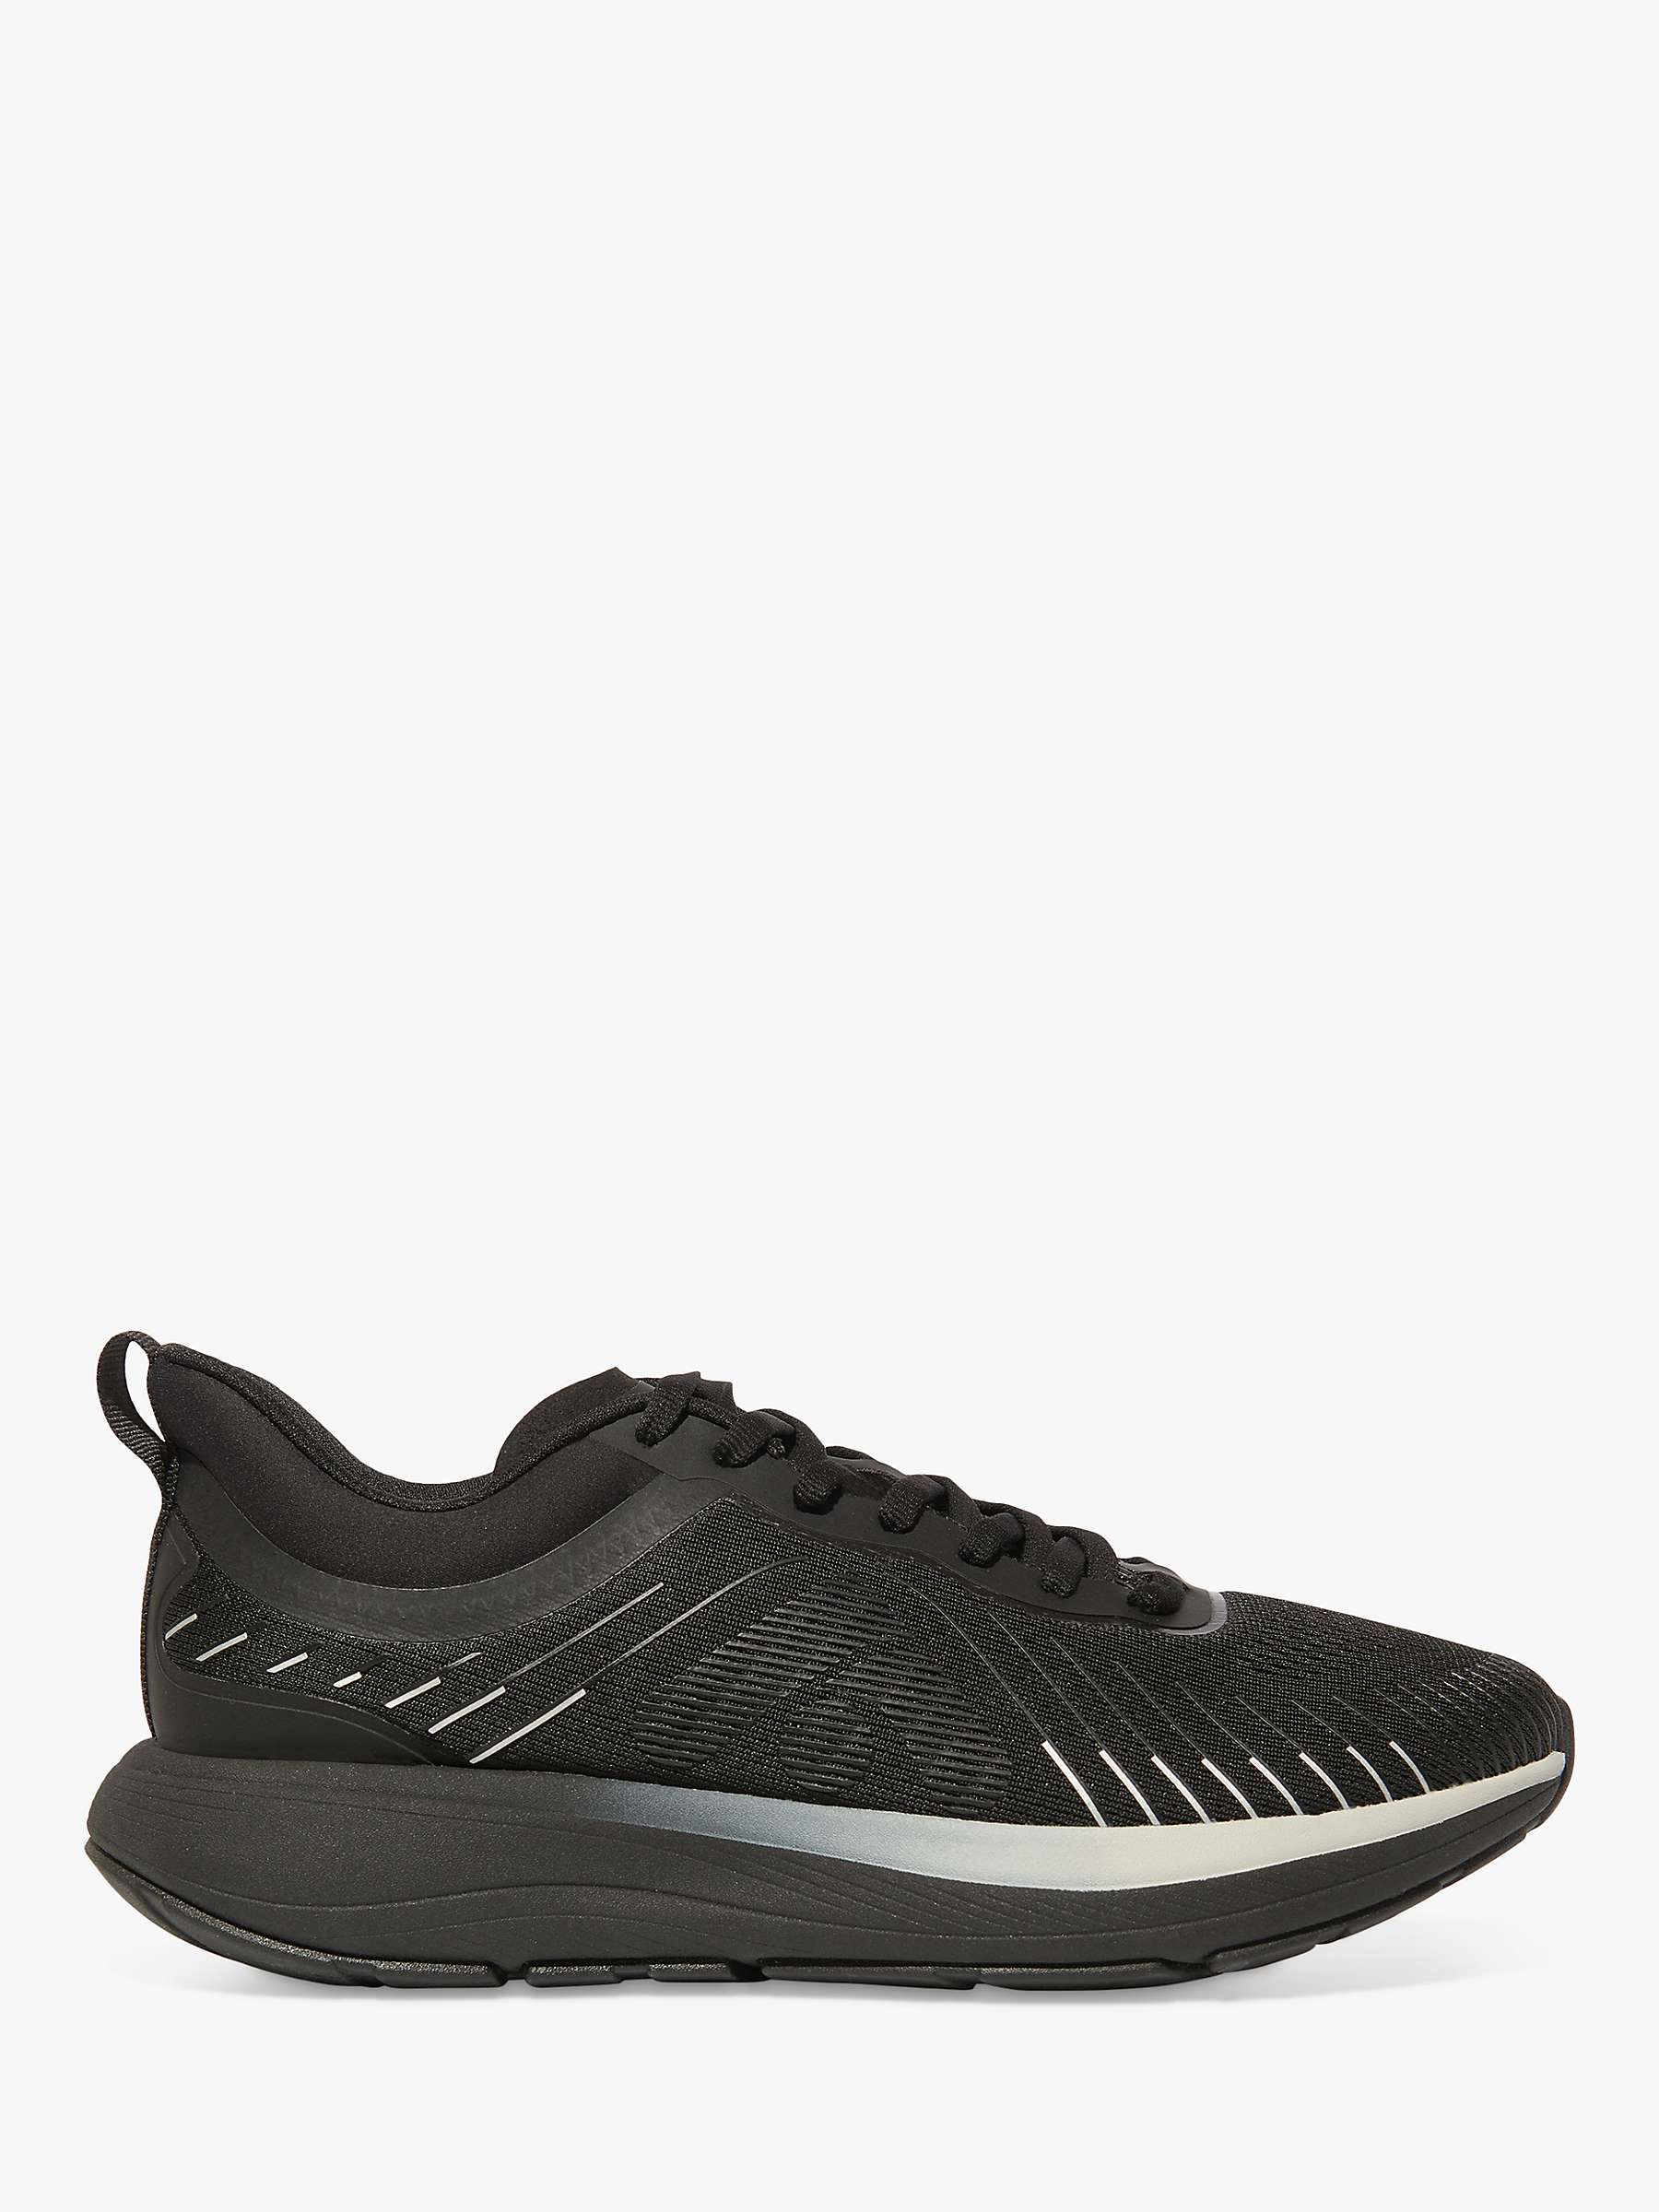 Buy FitFlop Performance Running Trainers, Black Online at johnlewis.com